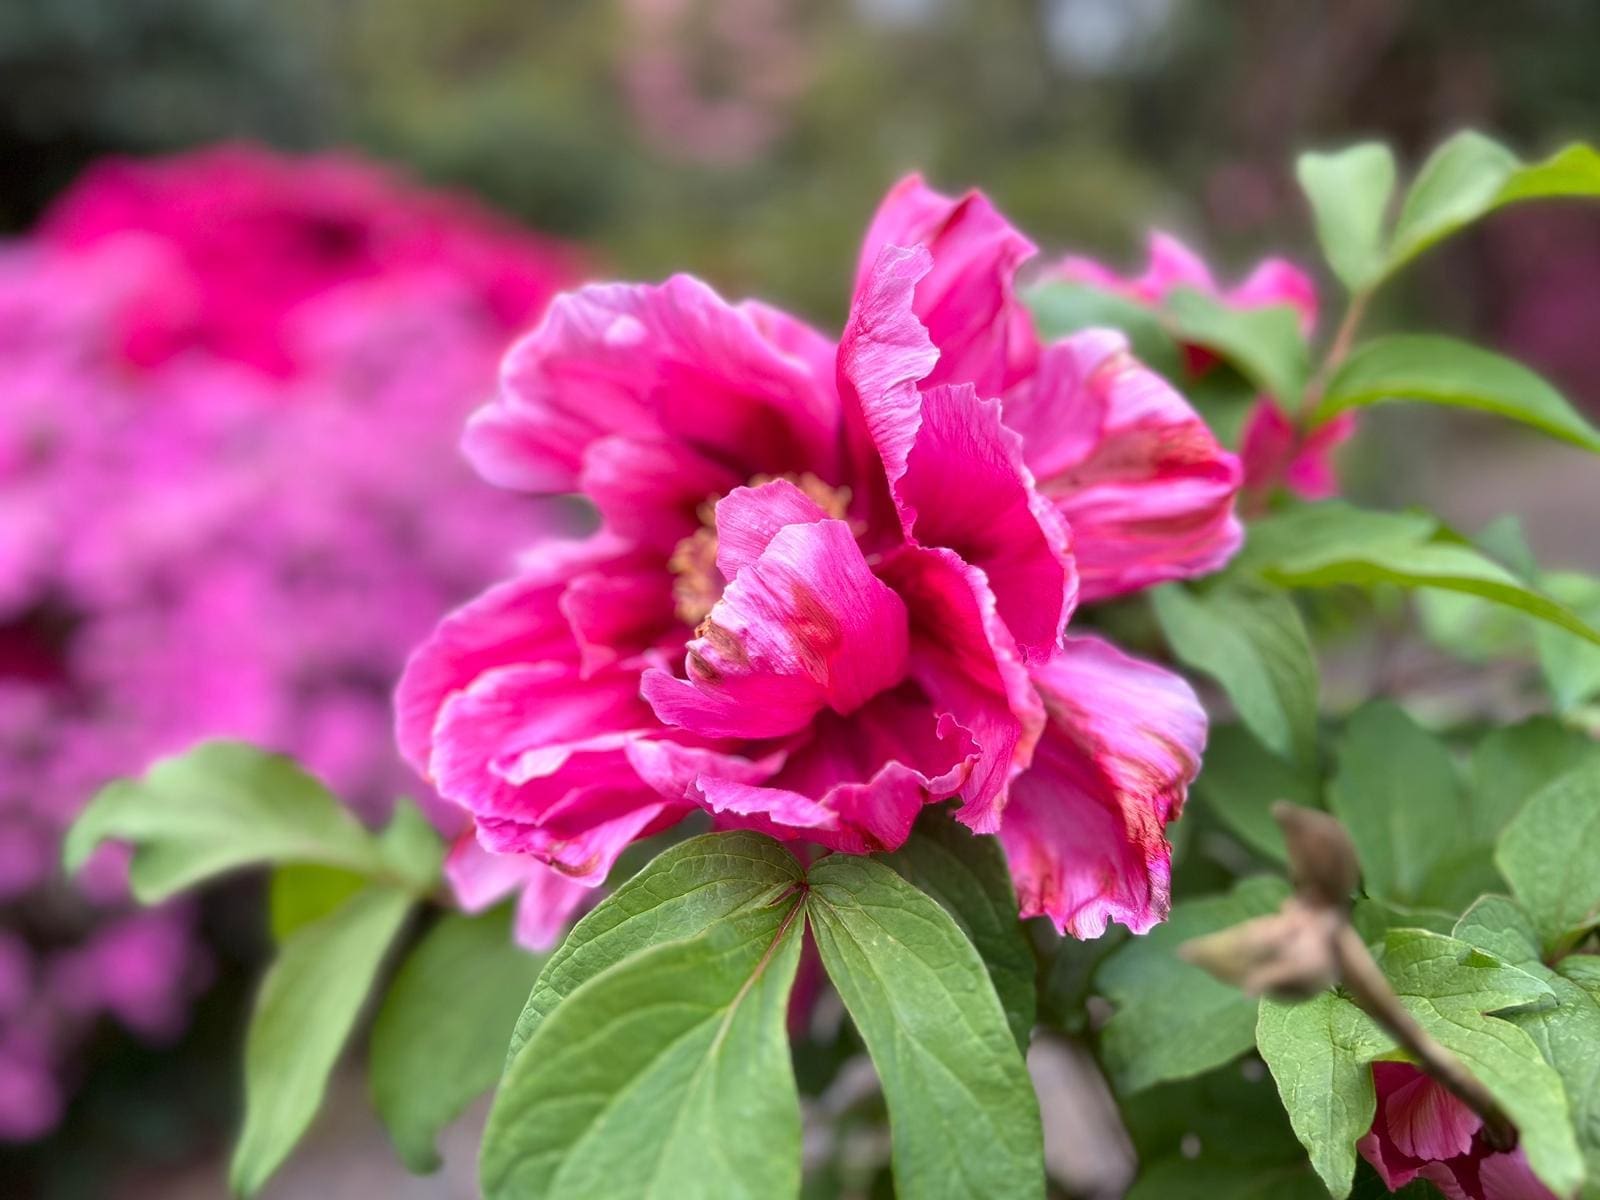 A peony rose in full bloom in the garden